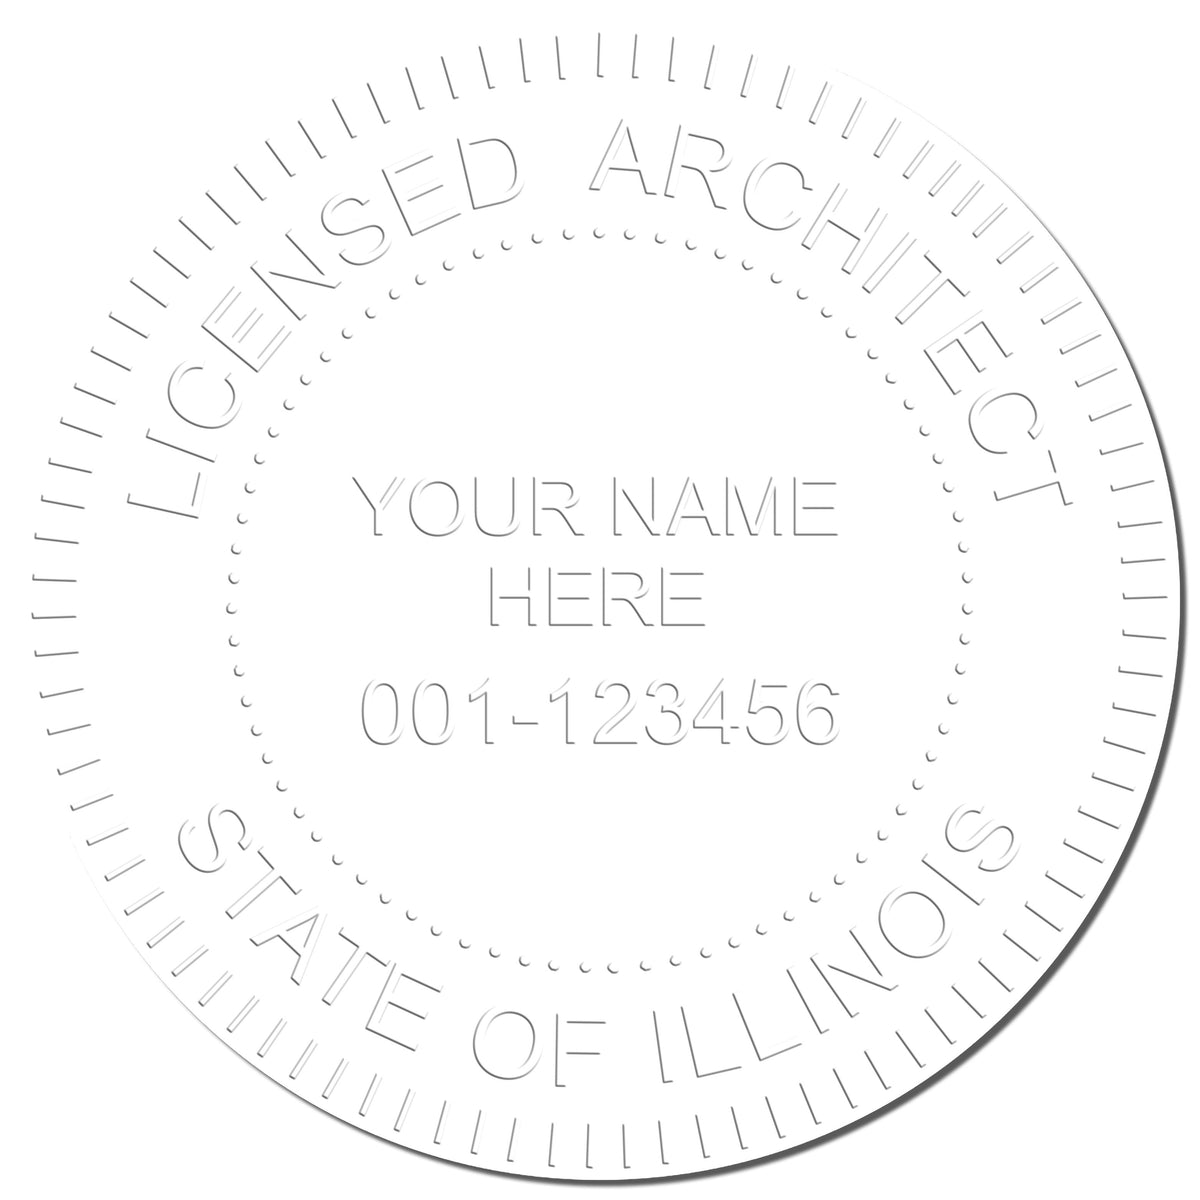 This paper is stamped with a sample imprint of the Hybrid Illinois Architect Seal, signifying its quality and reliability.